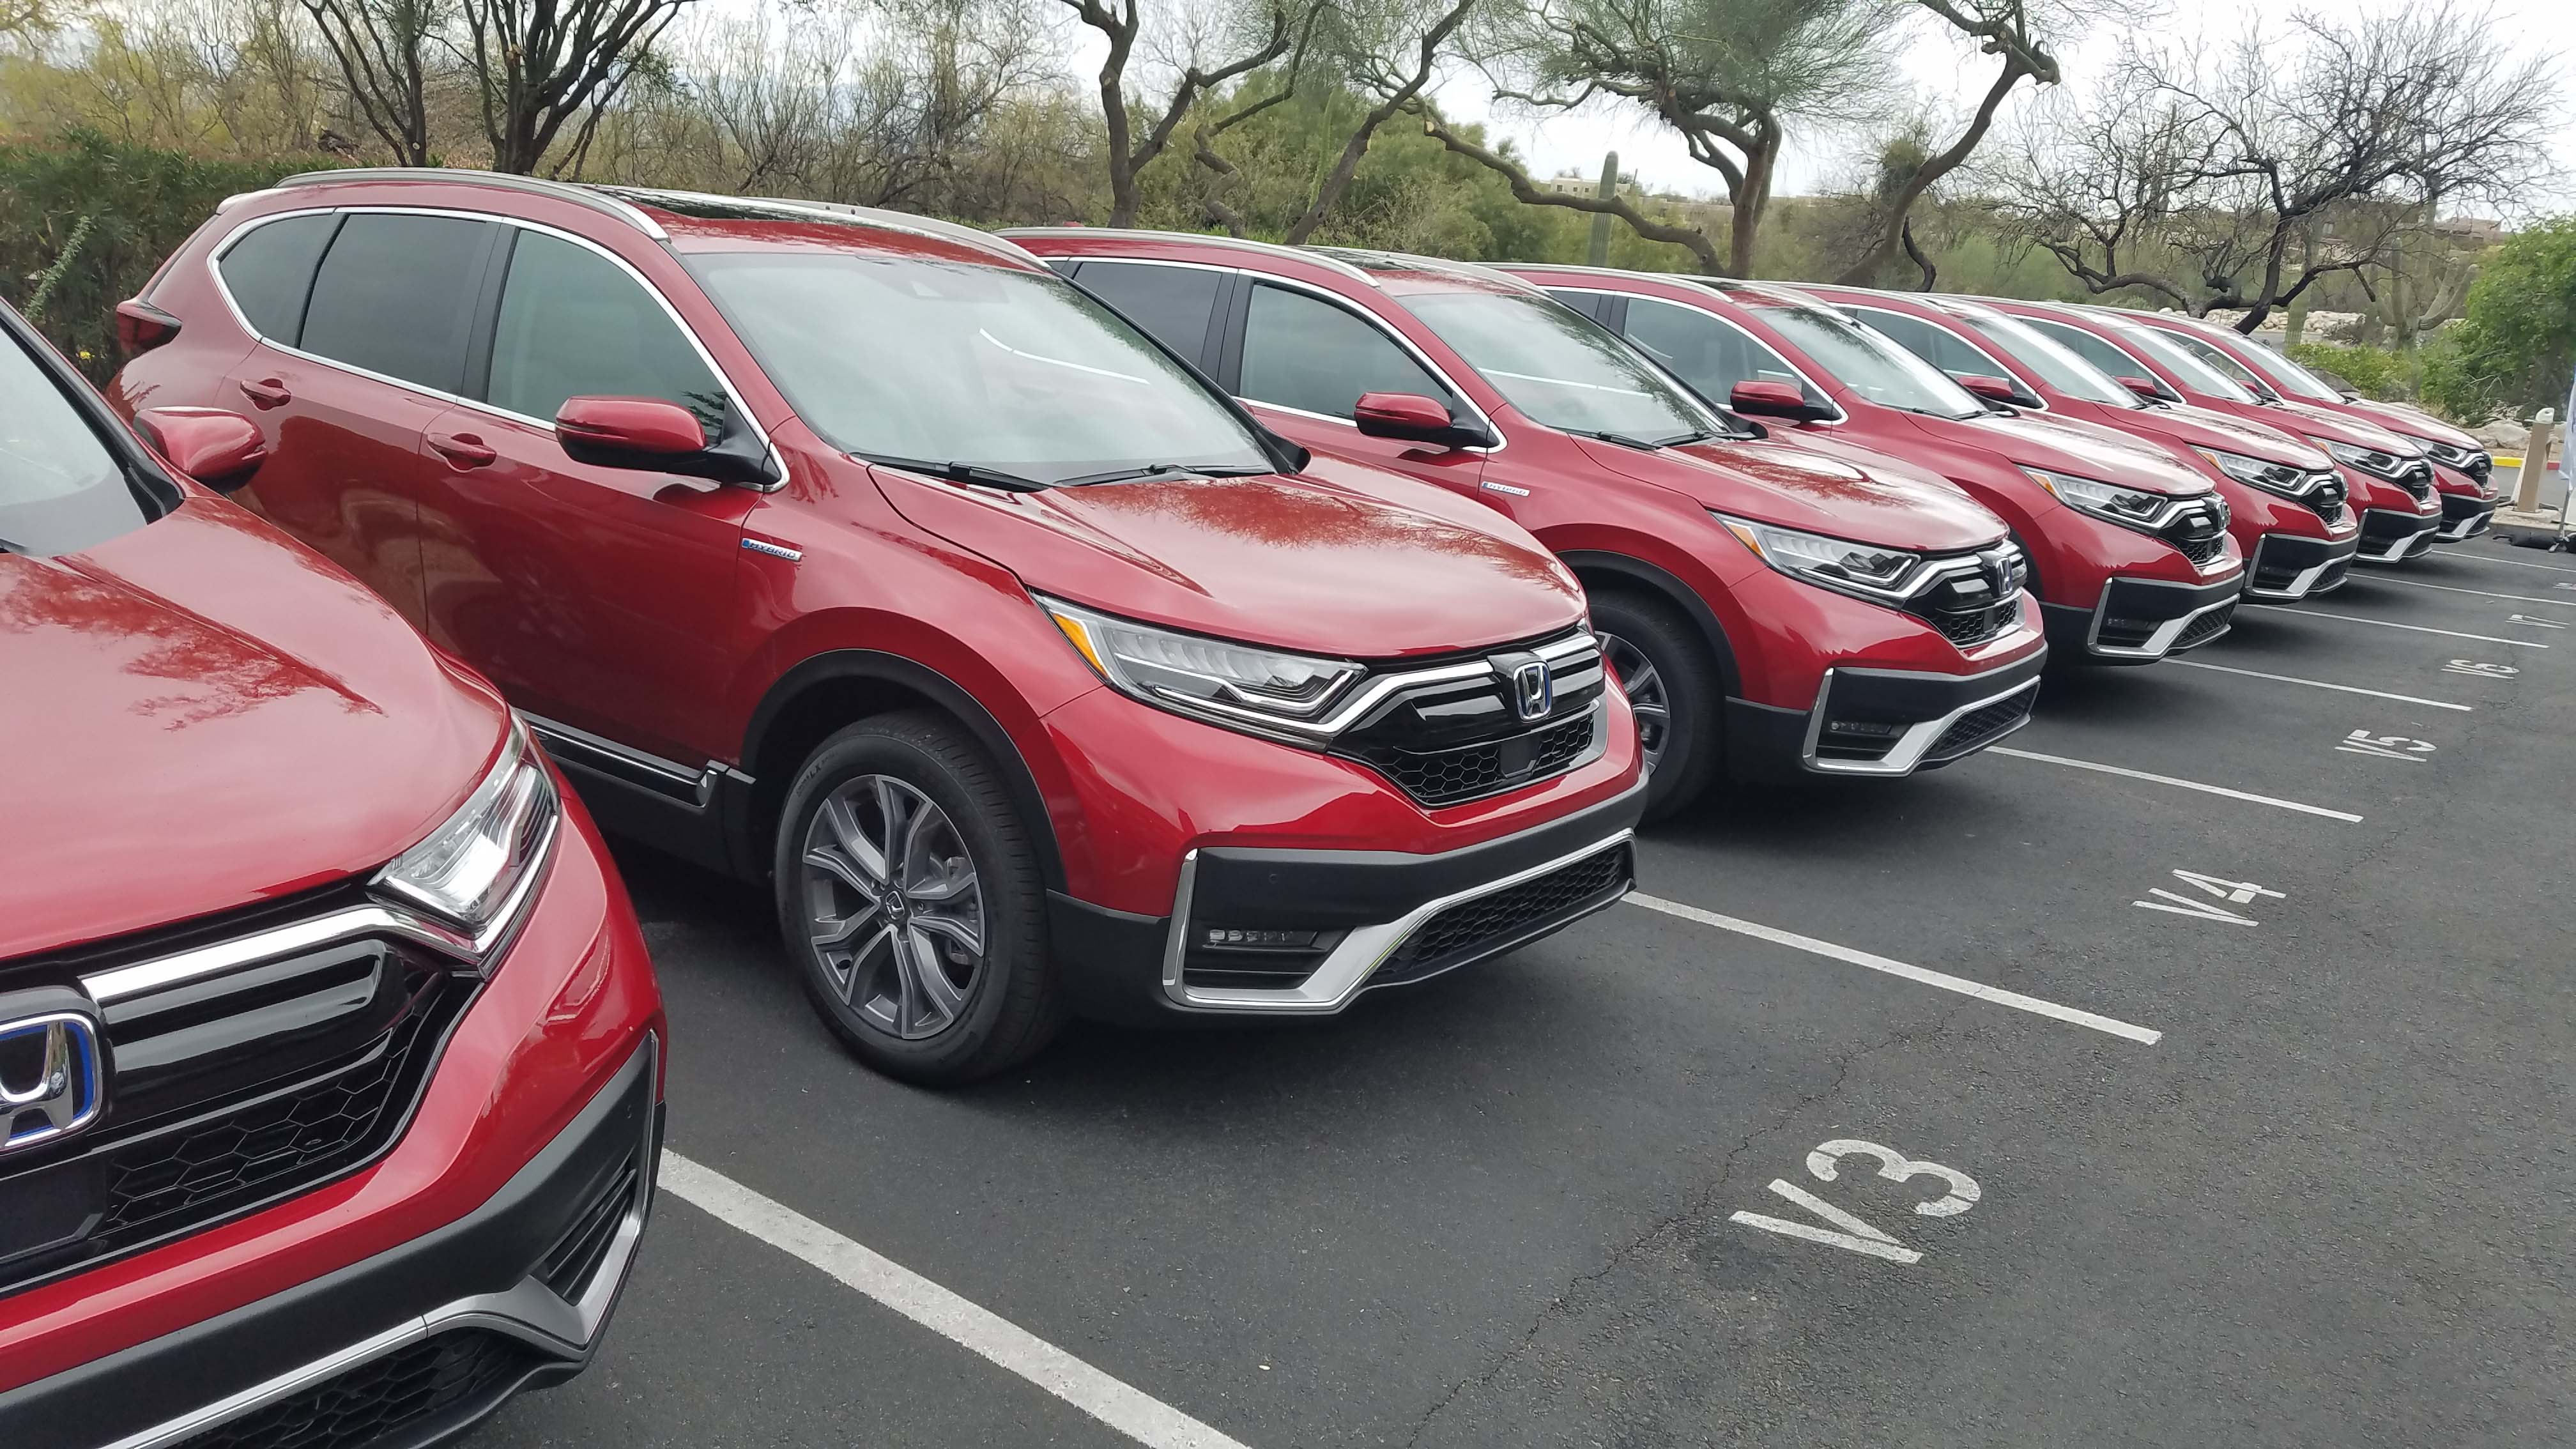 The 2020 Honda CR-V Hybrid can be had in Radiant Red Metallic.